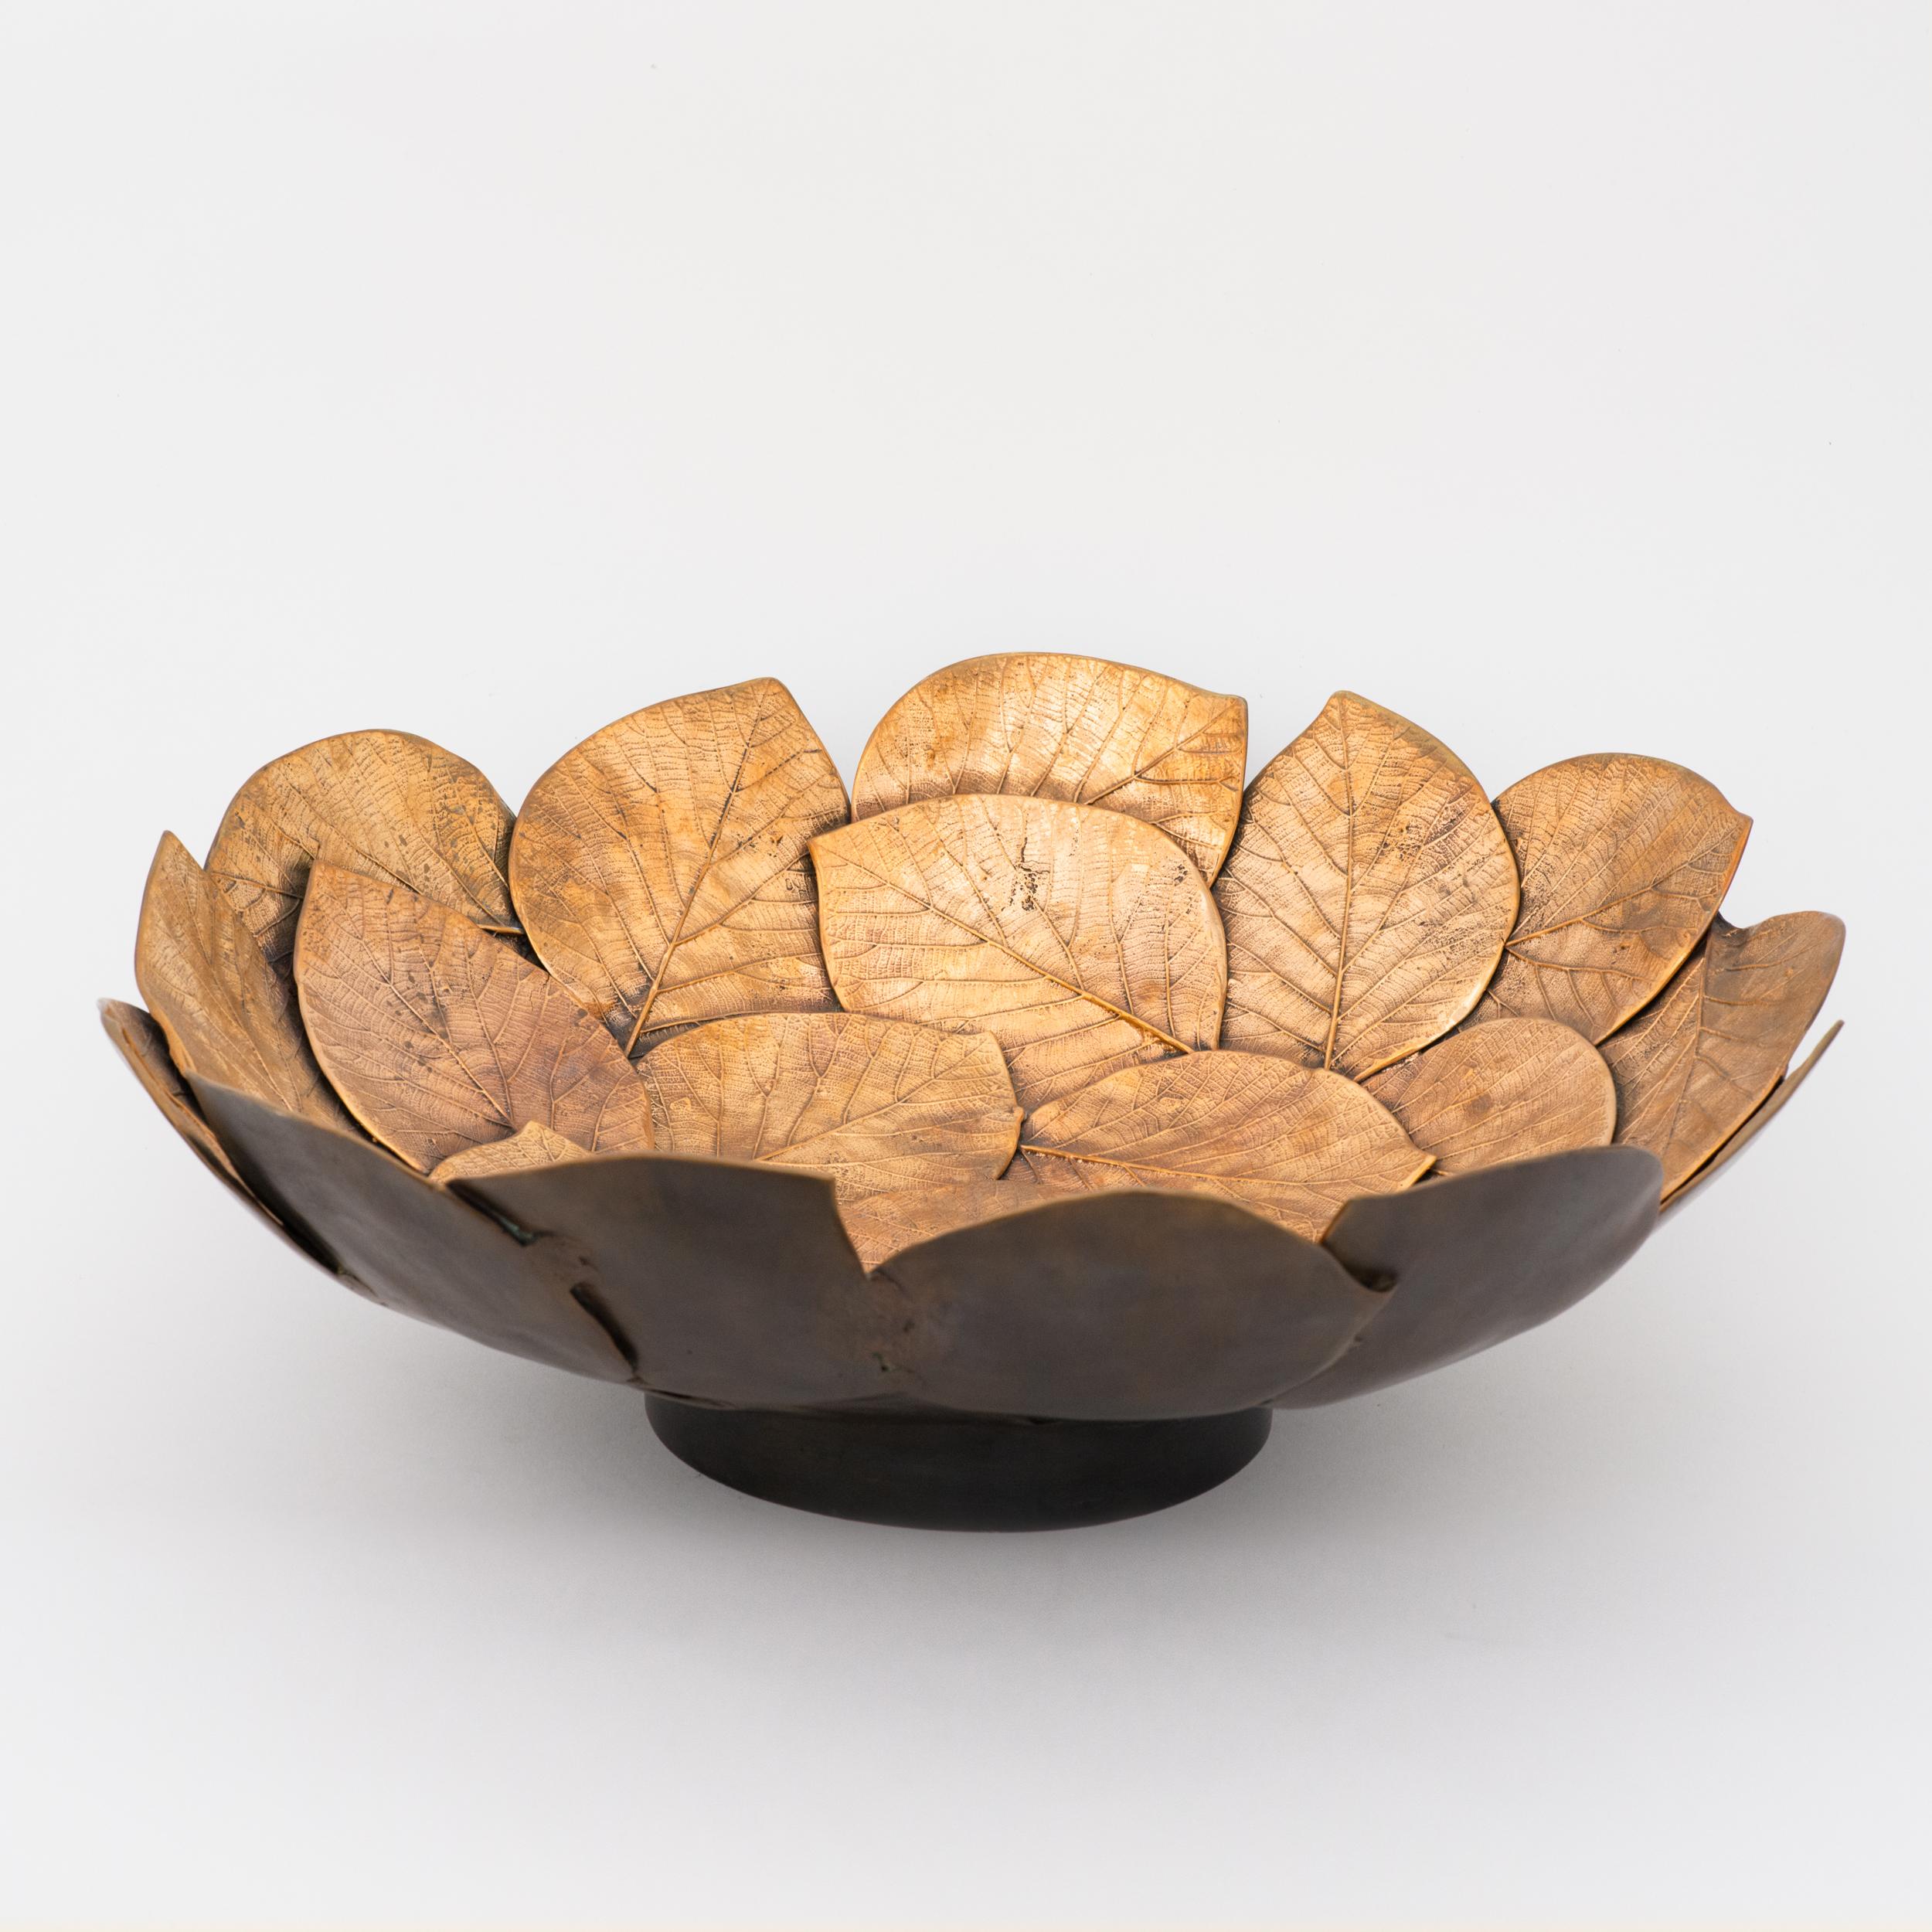 Unique and exquisite brass cast leaf decorative bowl. Handmade using highly skilled and specialised traditional processes to create an original and sumptuous piece.

Slight variations in the patina and polished finishes, patterns and sizes are